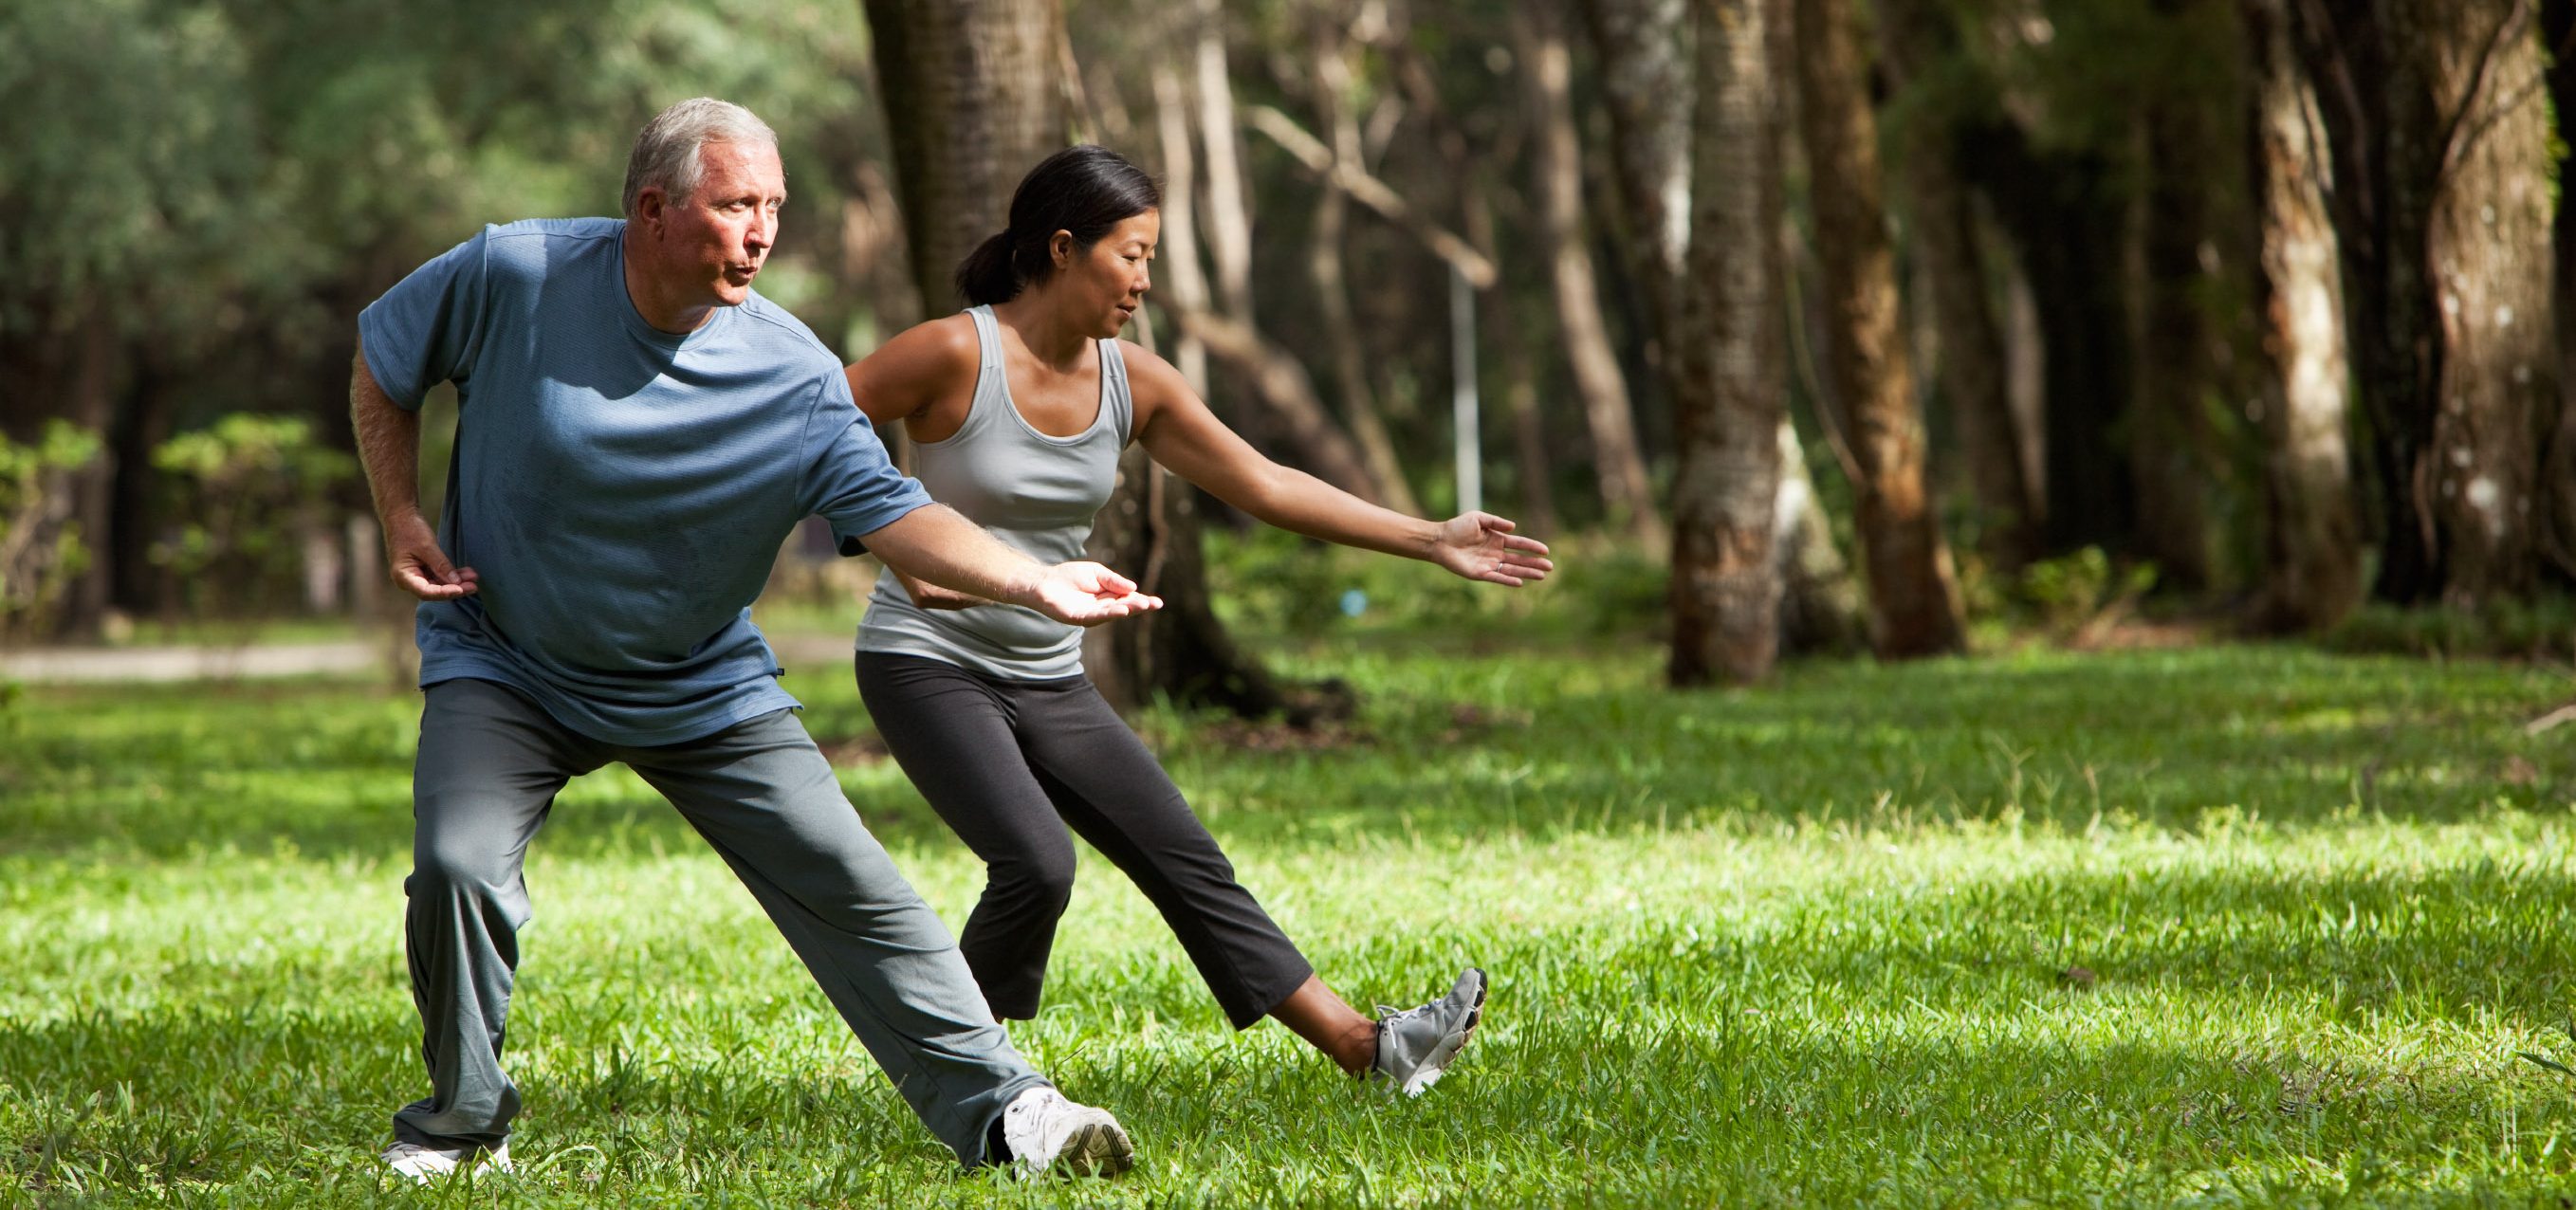 Tai chi class - senior man (60s) and mature Asian woman (40s) practicing tai chi in park.